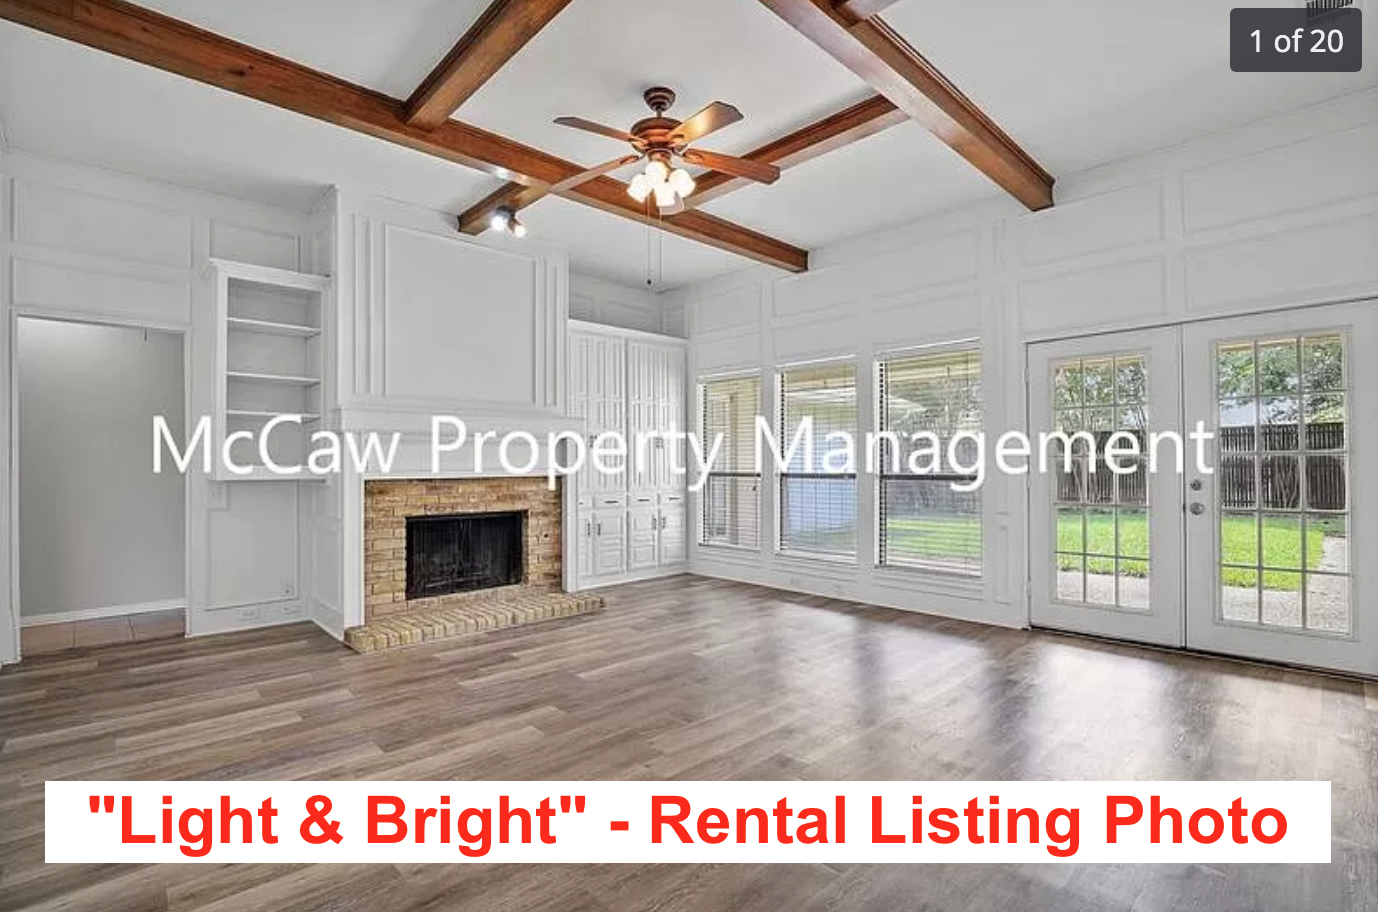 Example of Light and Bright Rental Listing Photograph